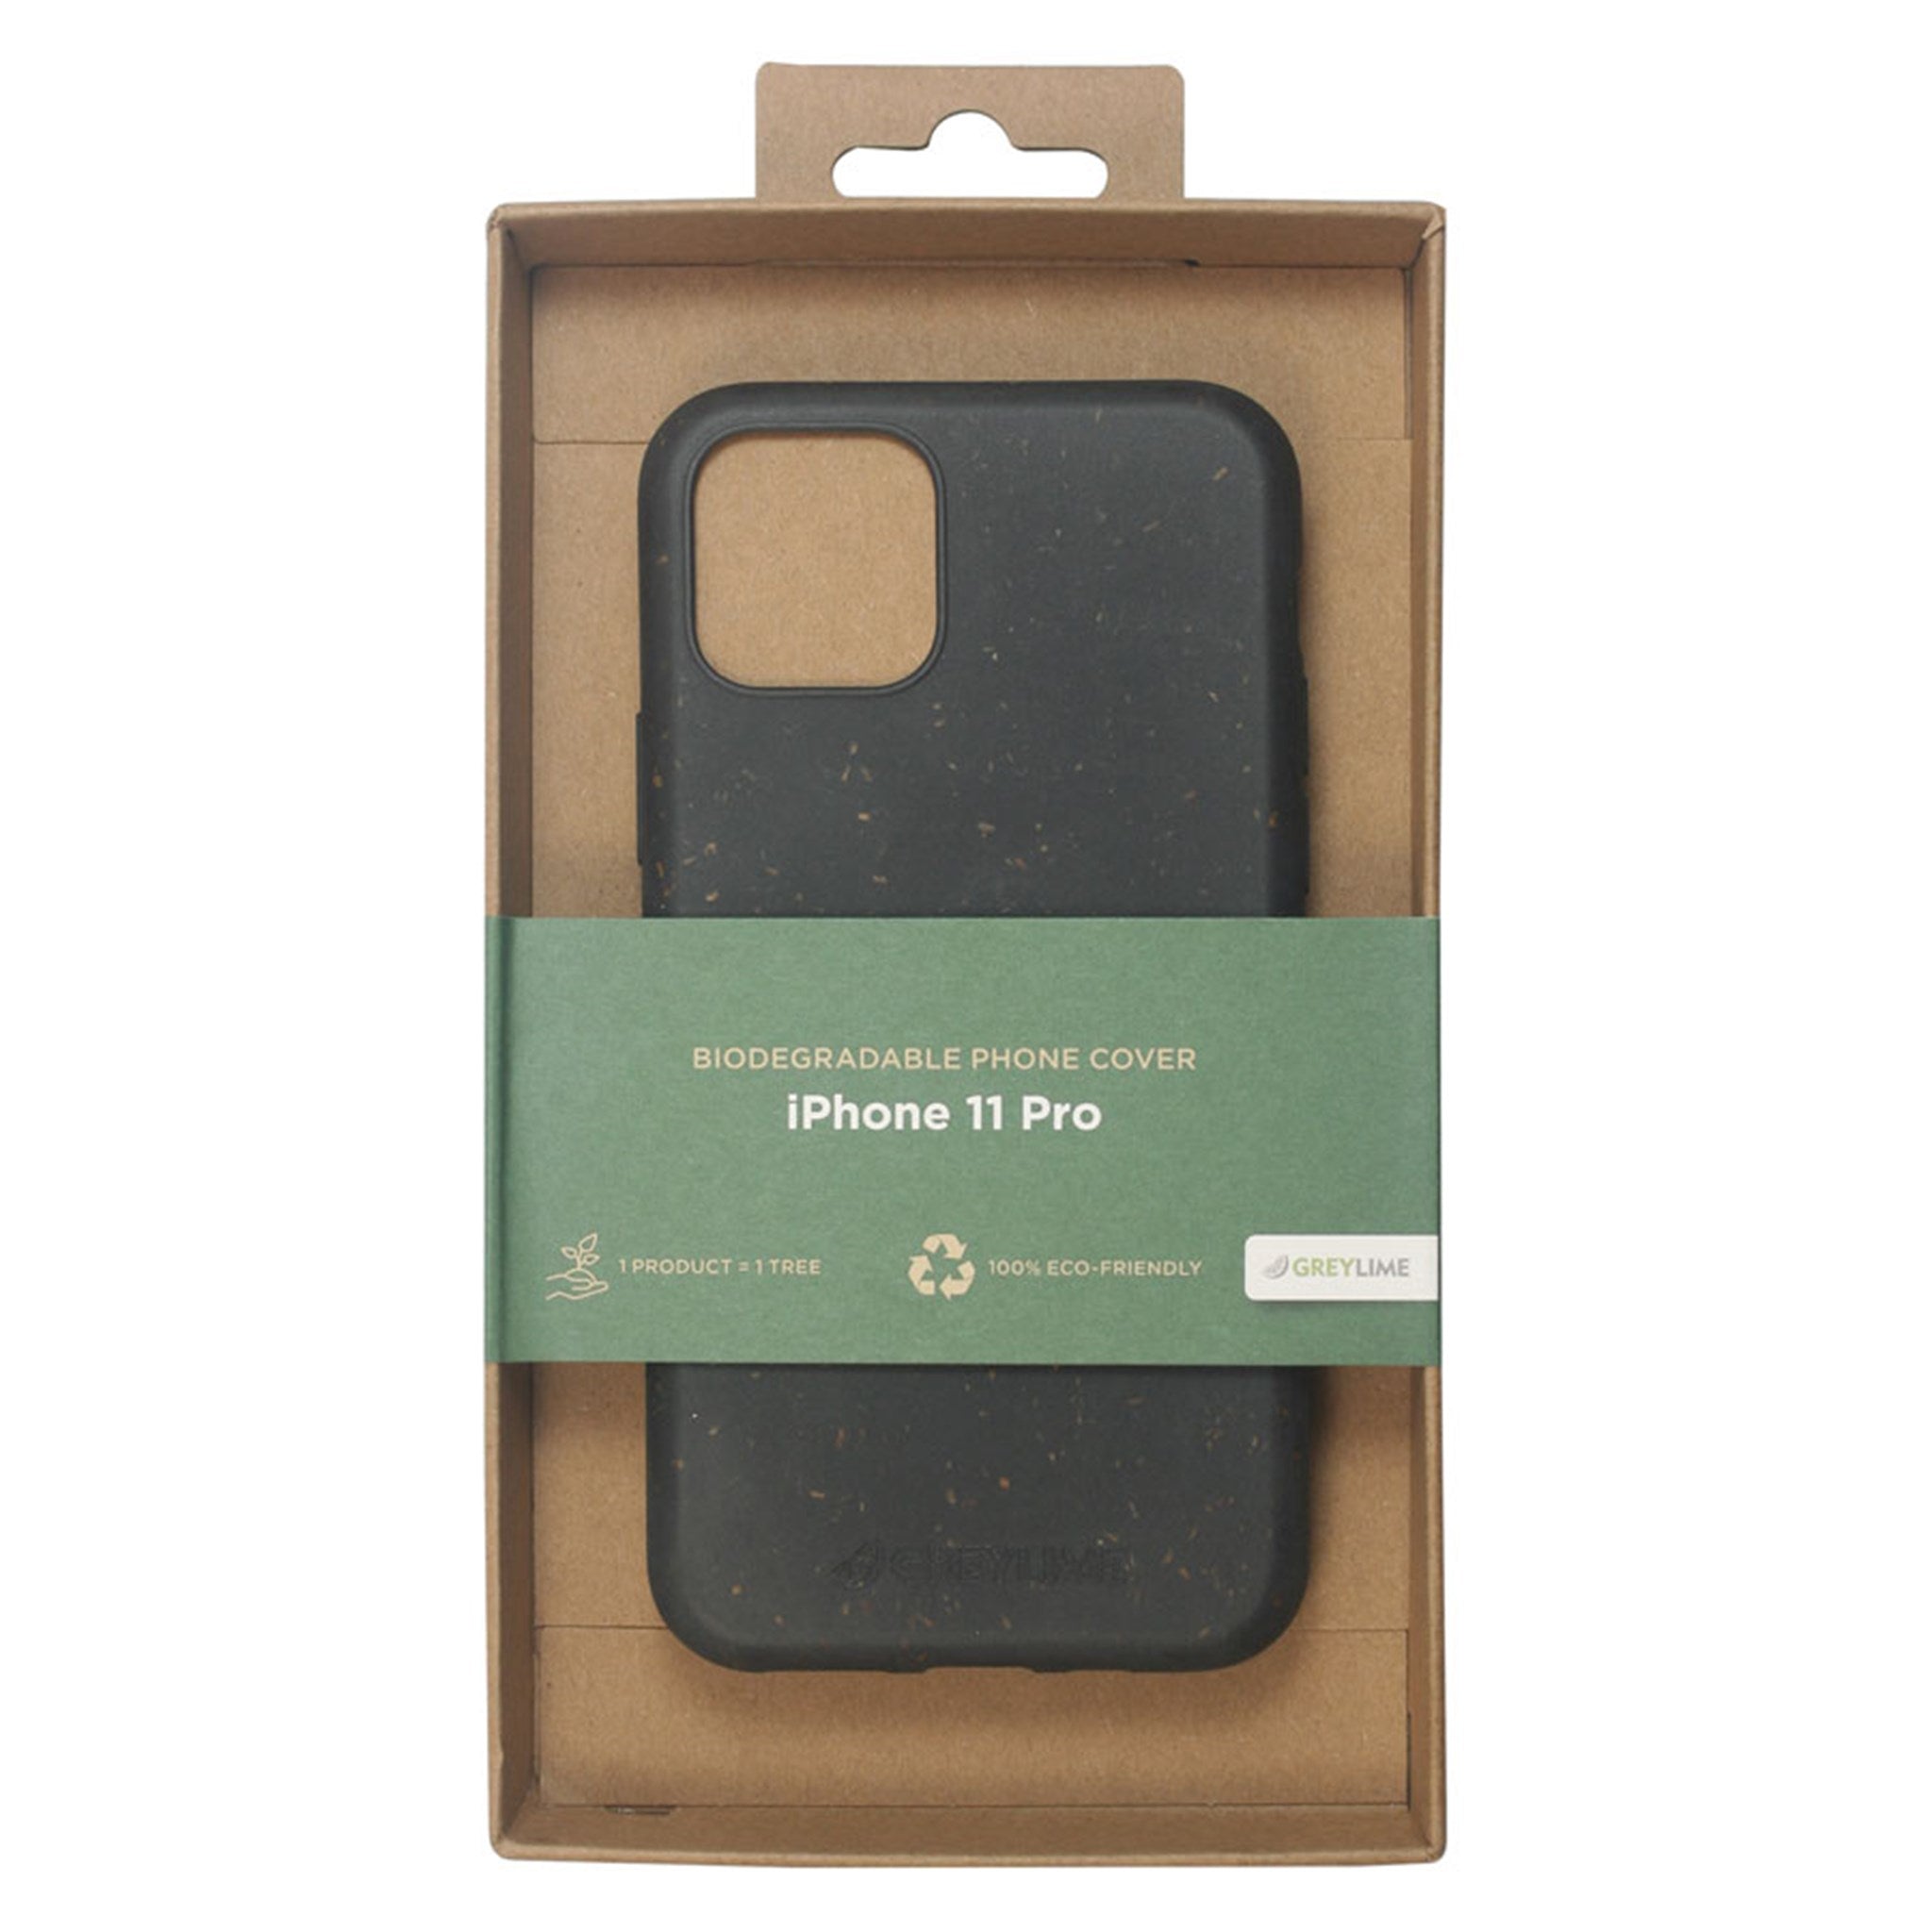 COIP11P06 Greylime Iphone 11 Pro Biodegradable Cover Black 6